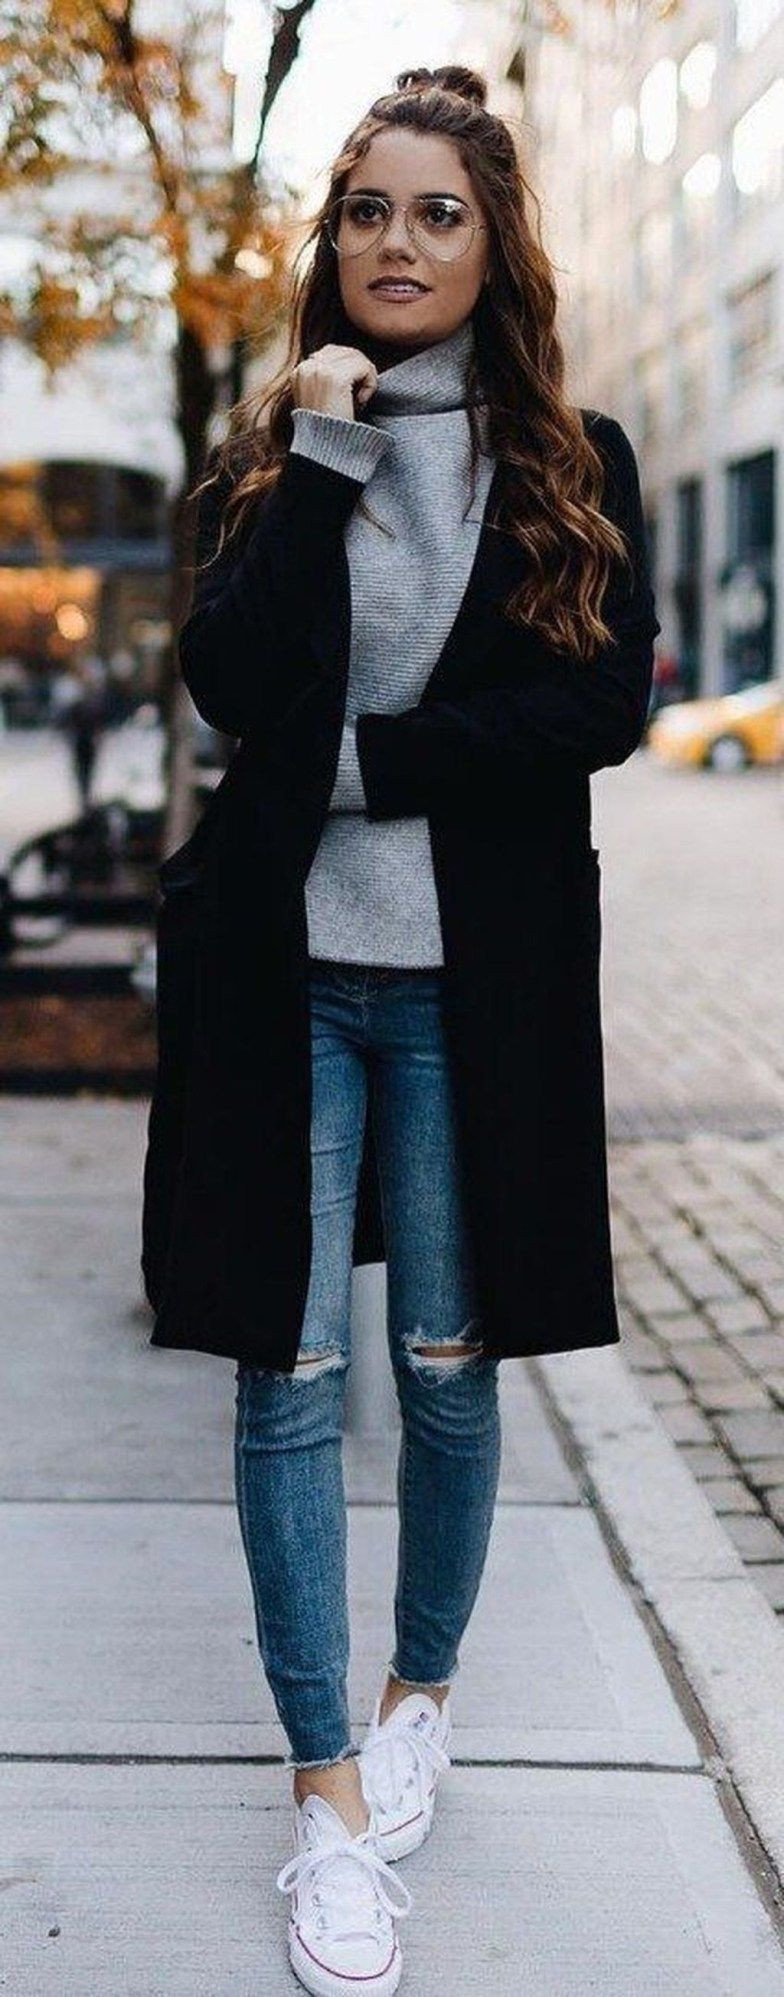 Womens Winter Outfit Ideas
 Best casual winter outfit ideas 2018 for women 26